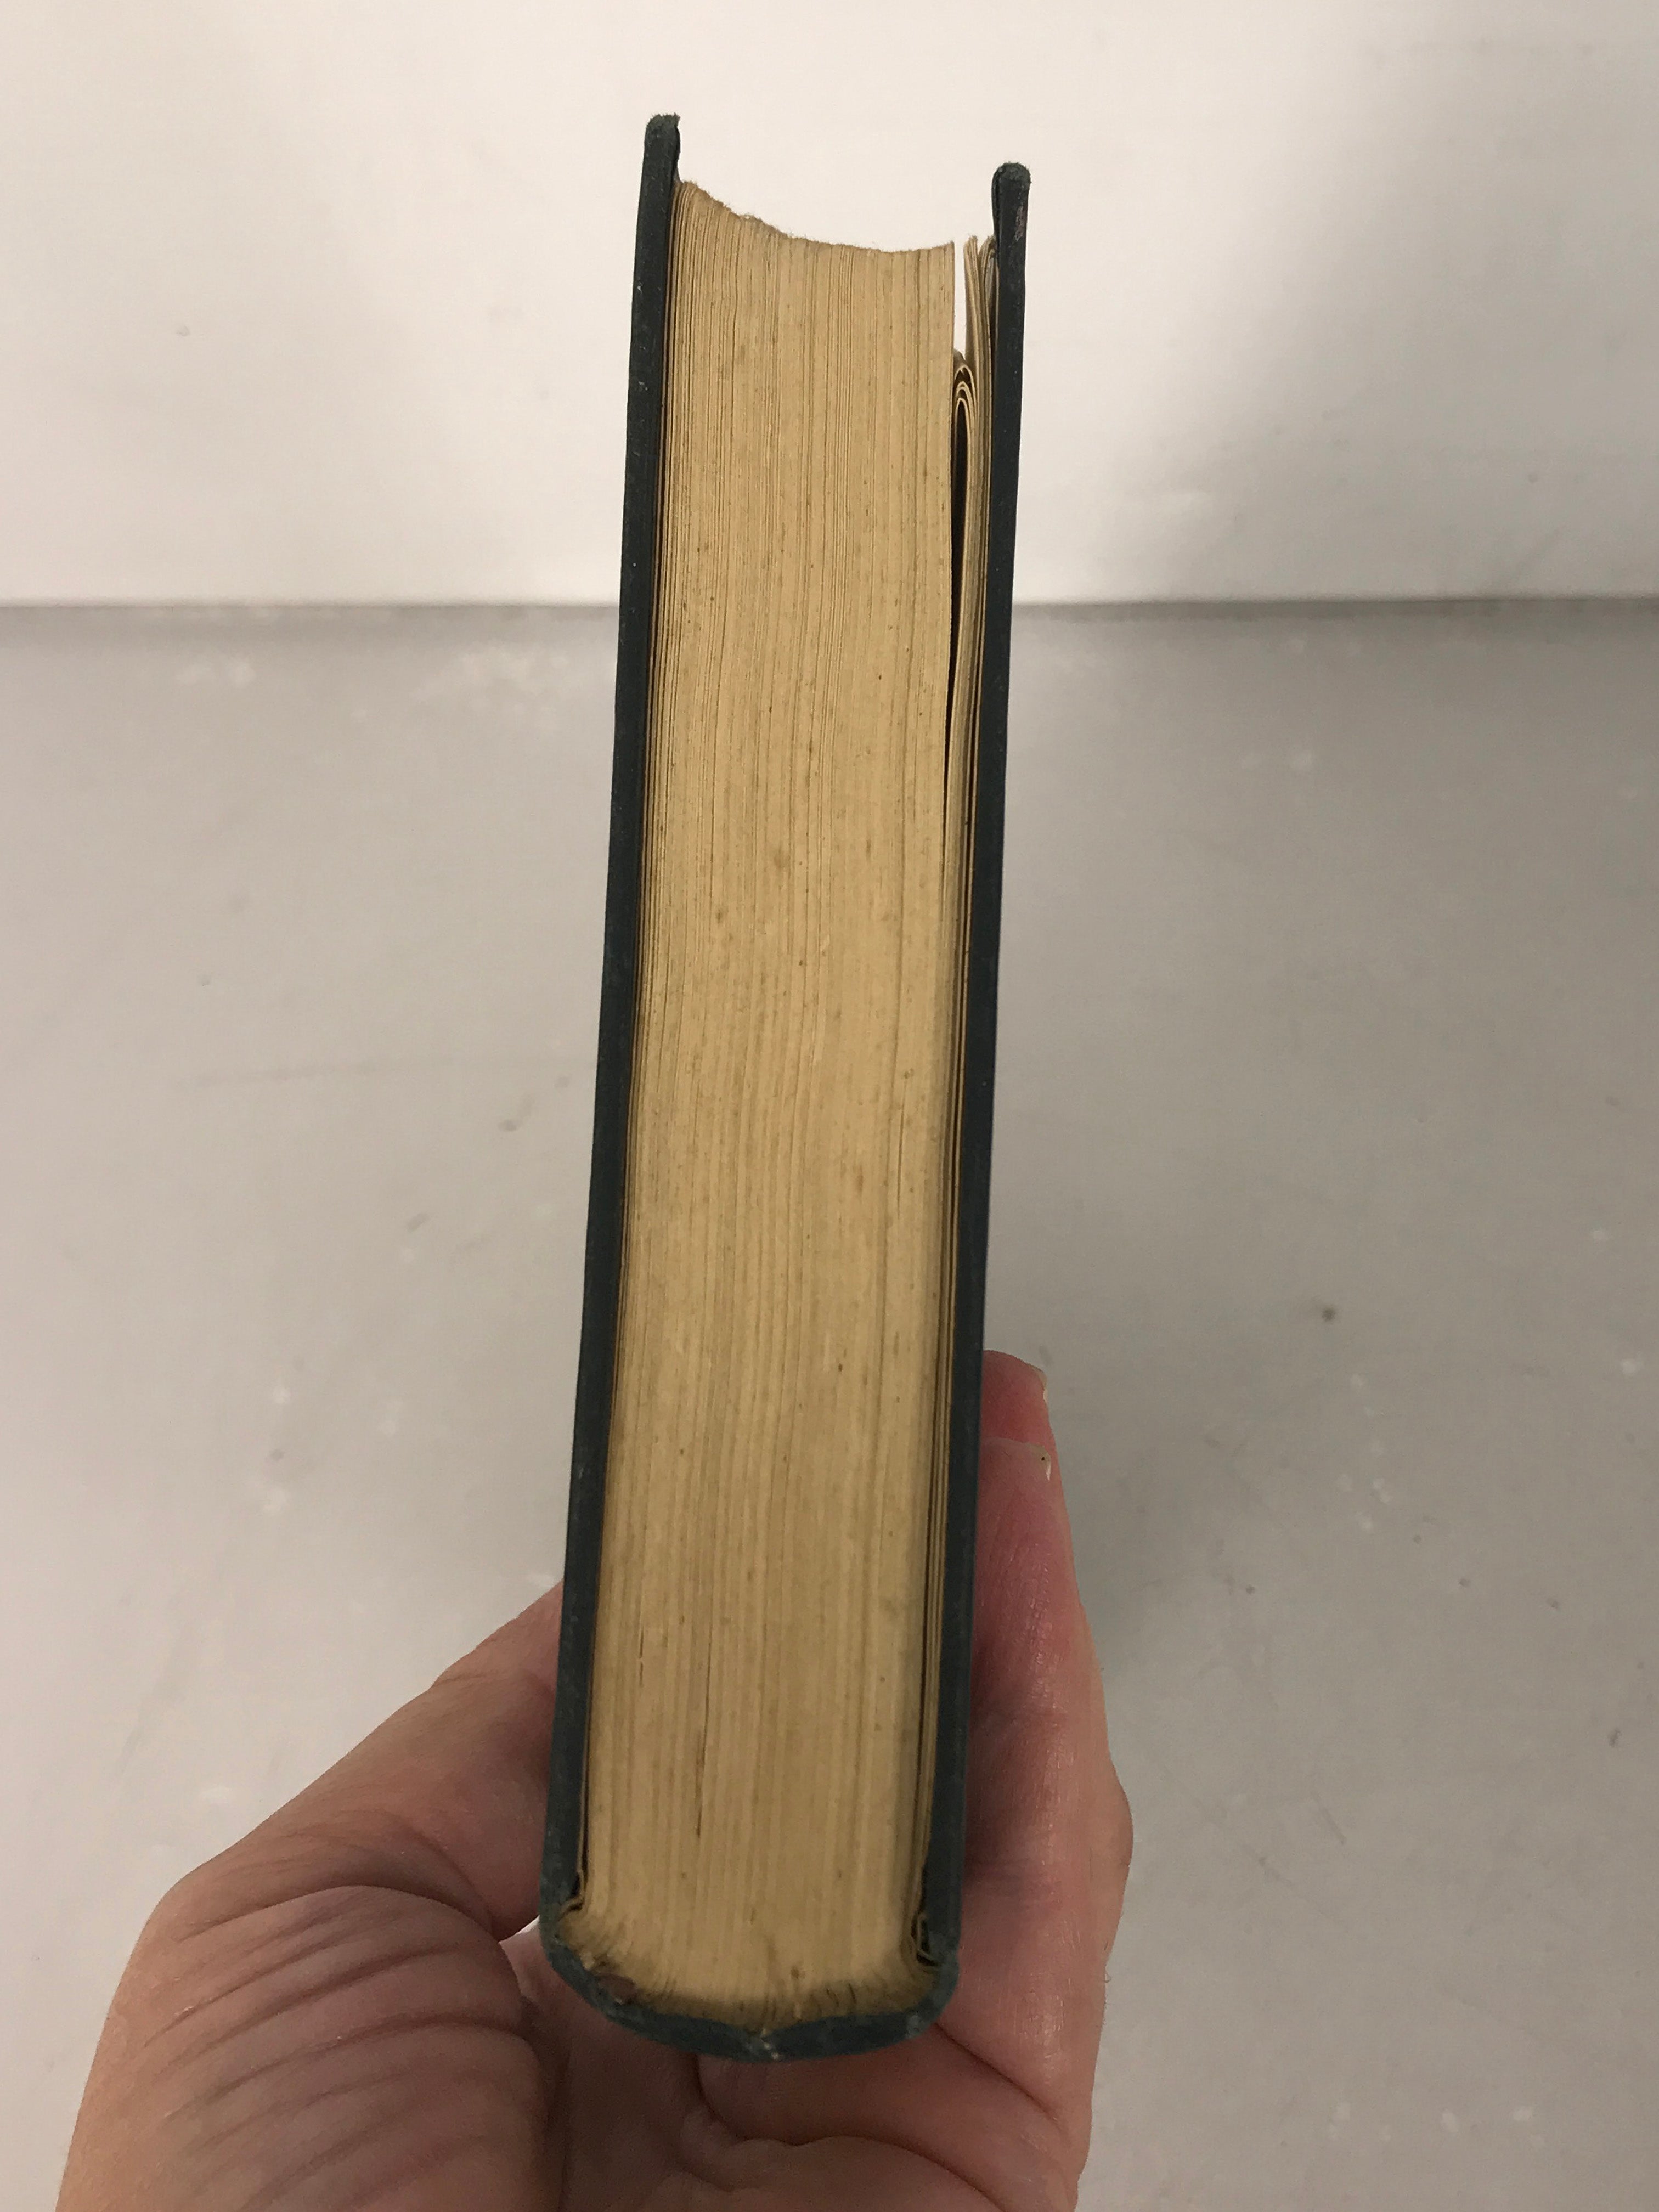 Individual Psychology by Alfred Adler 1946 HC